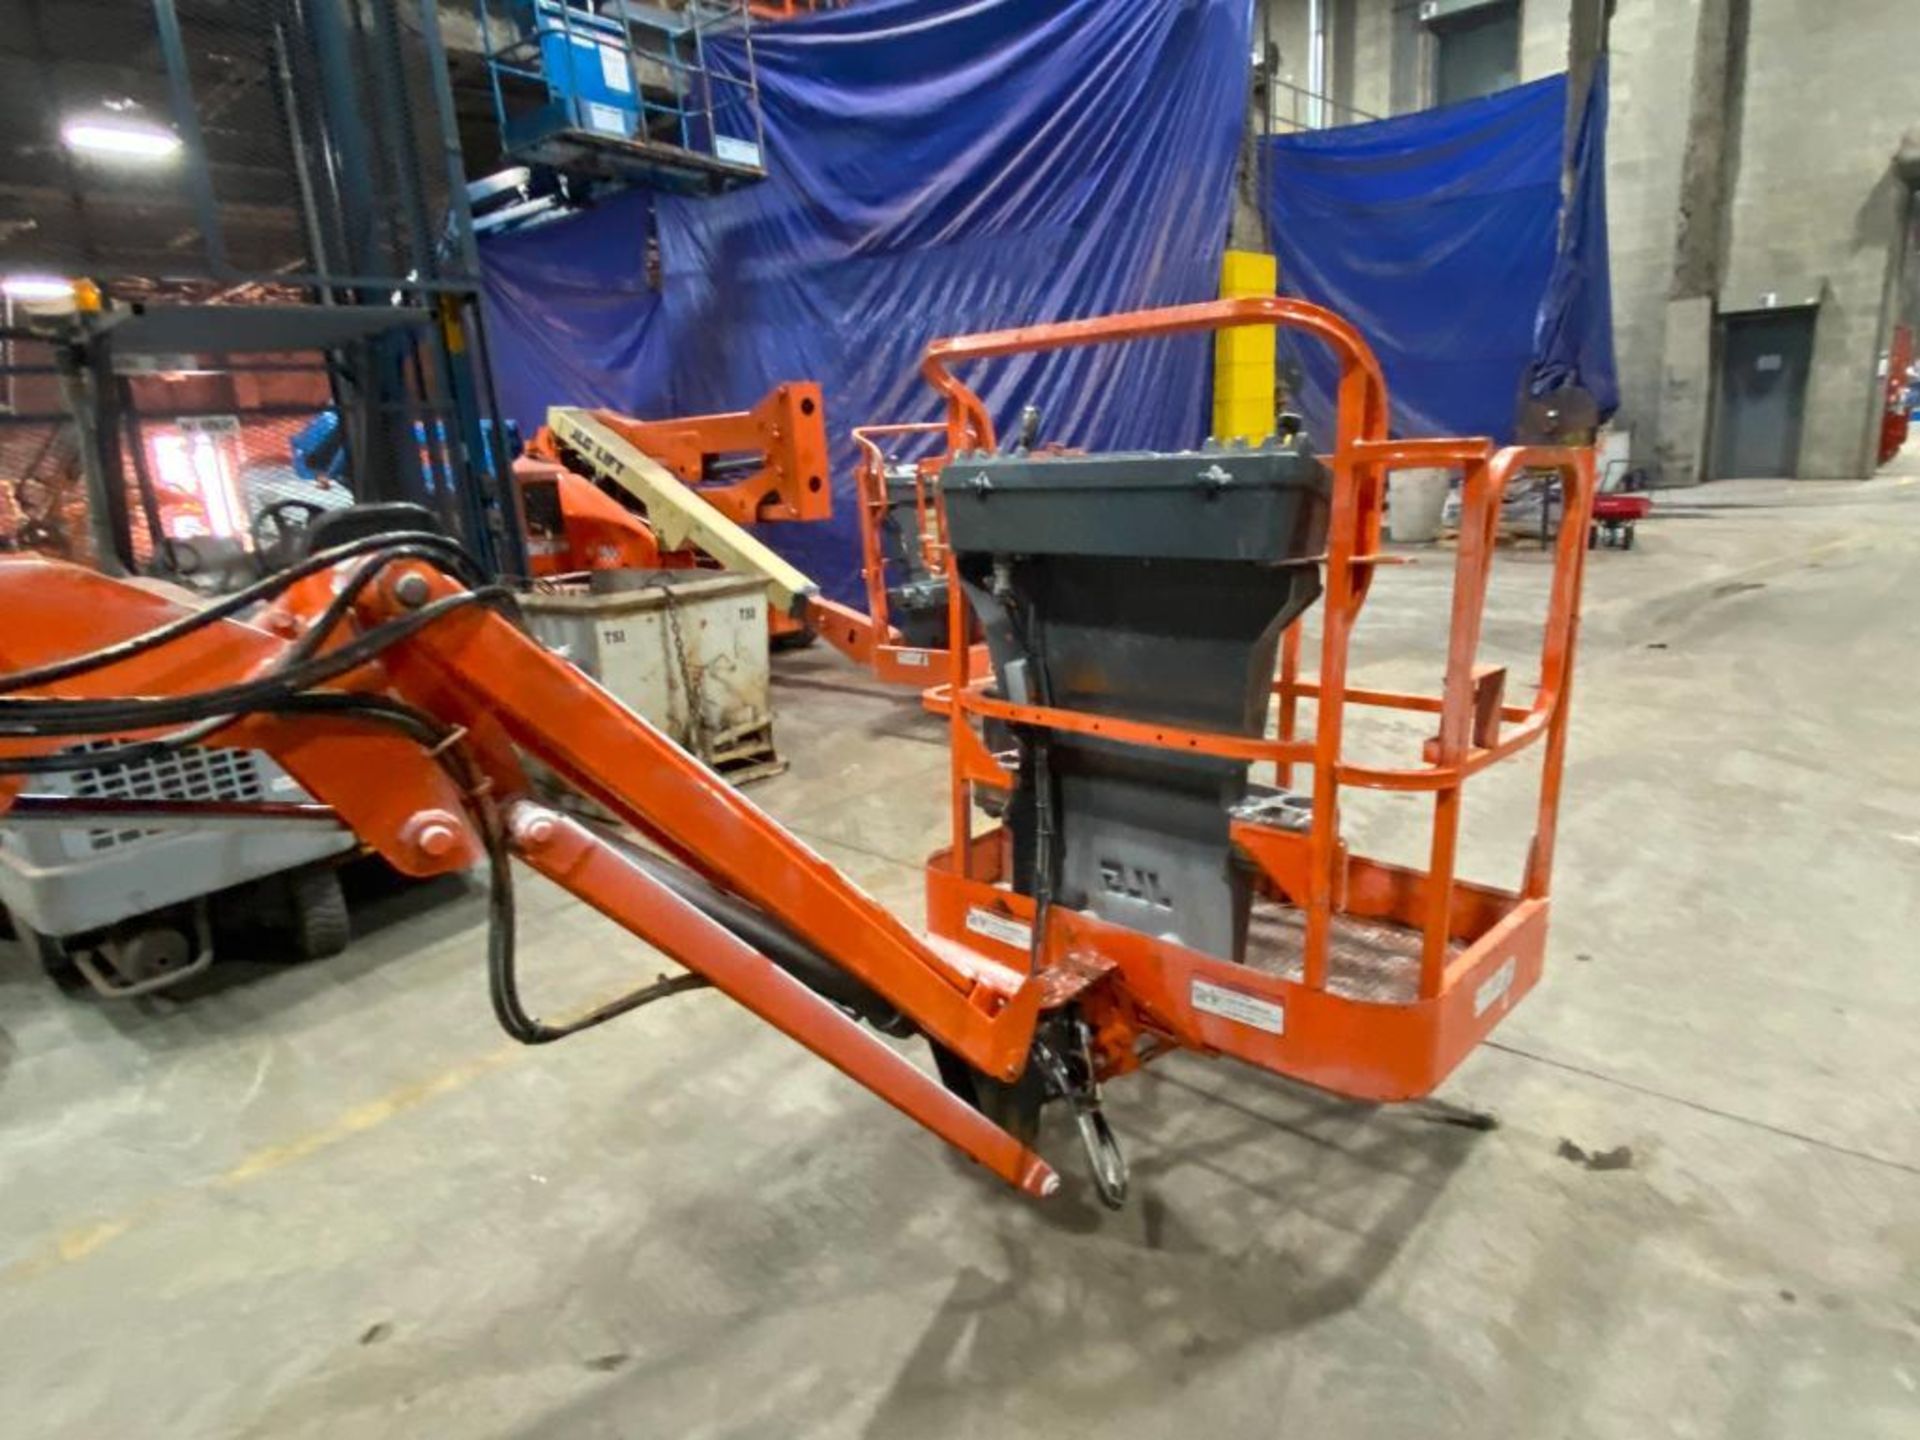 JLG E300AJP Articulating Boom Lift (S/N 300124789, Year 2008), with 29'5" Platform Height, 30" x 48" - Image 4 of 12